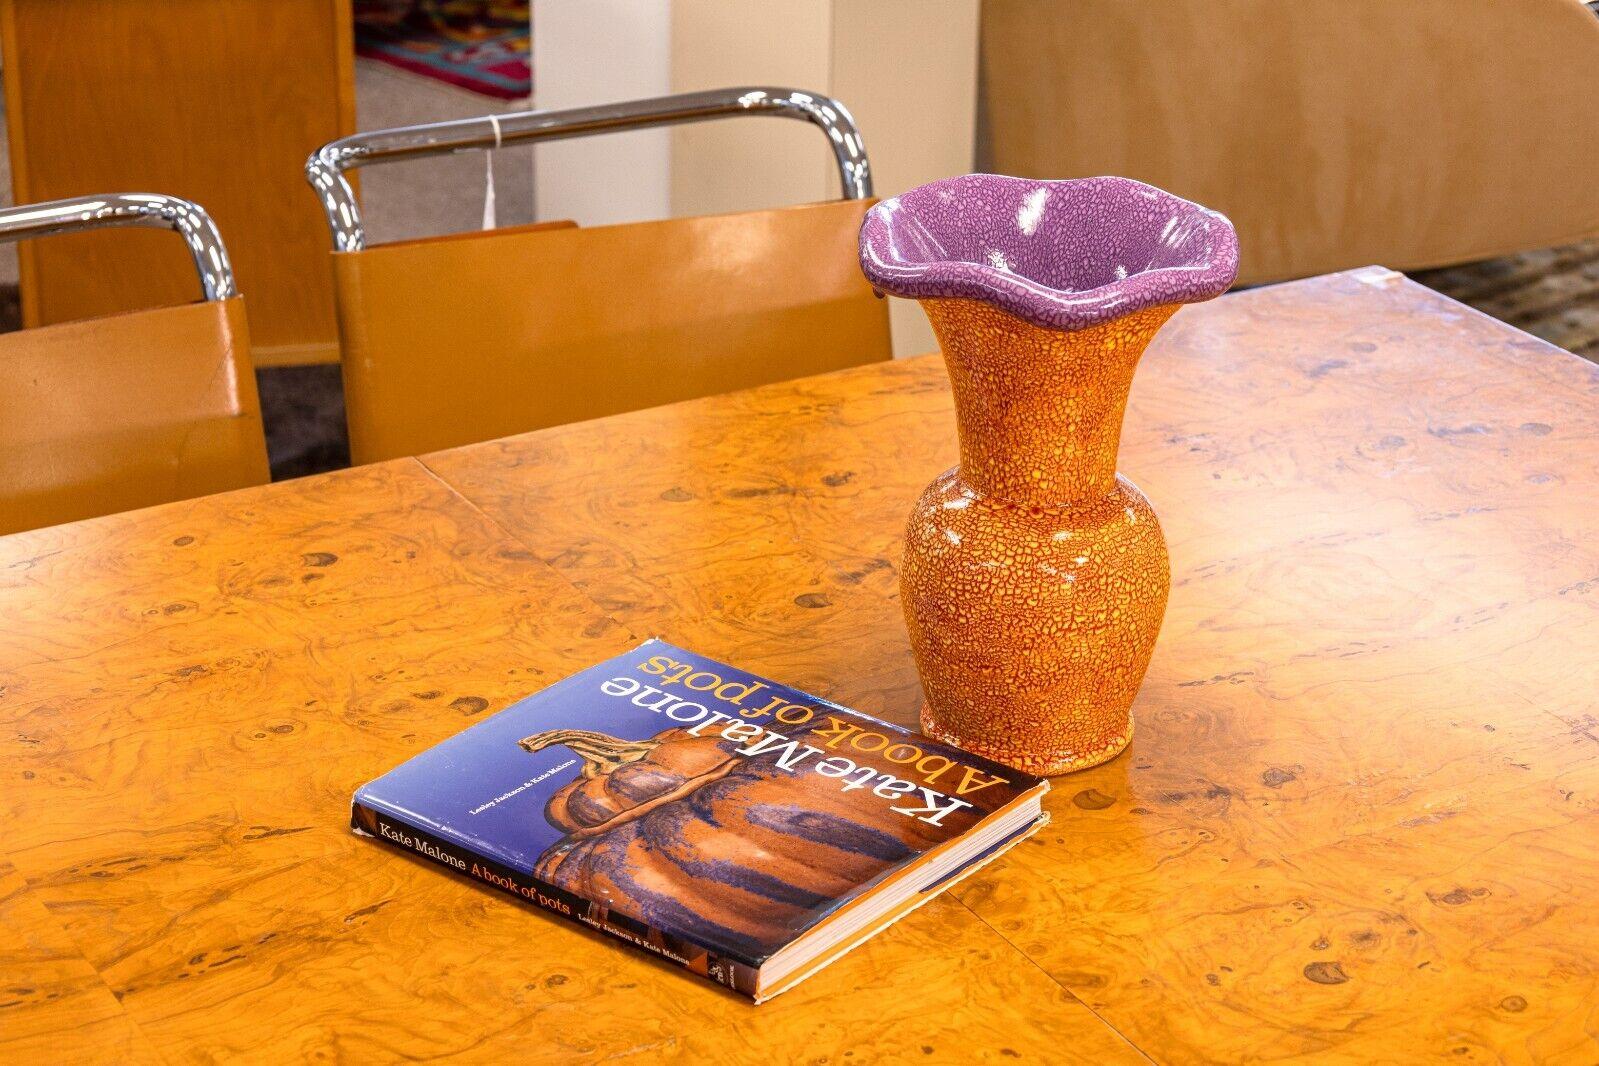 A Kate Malone orange and purple abstract ceramic vase. This is a lovely vase from English ceramist, Kate Malone. Malone is known for her bright sculptural ceramic sculptures with unique glazes and designs. Her work takes great inspiration from